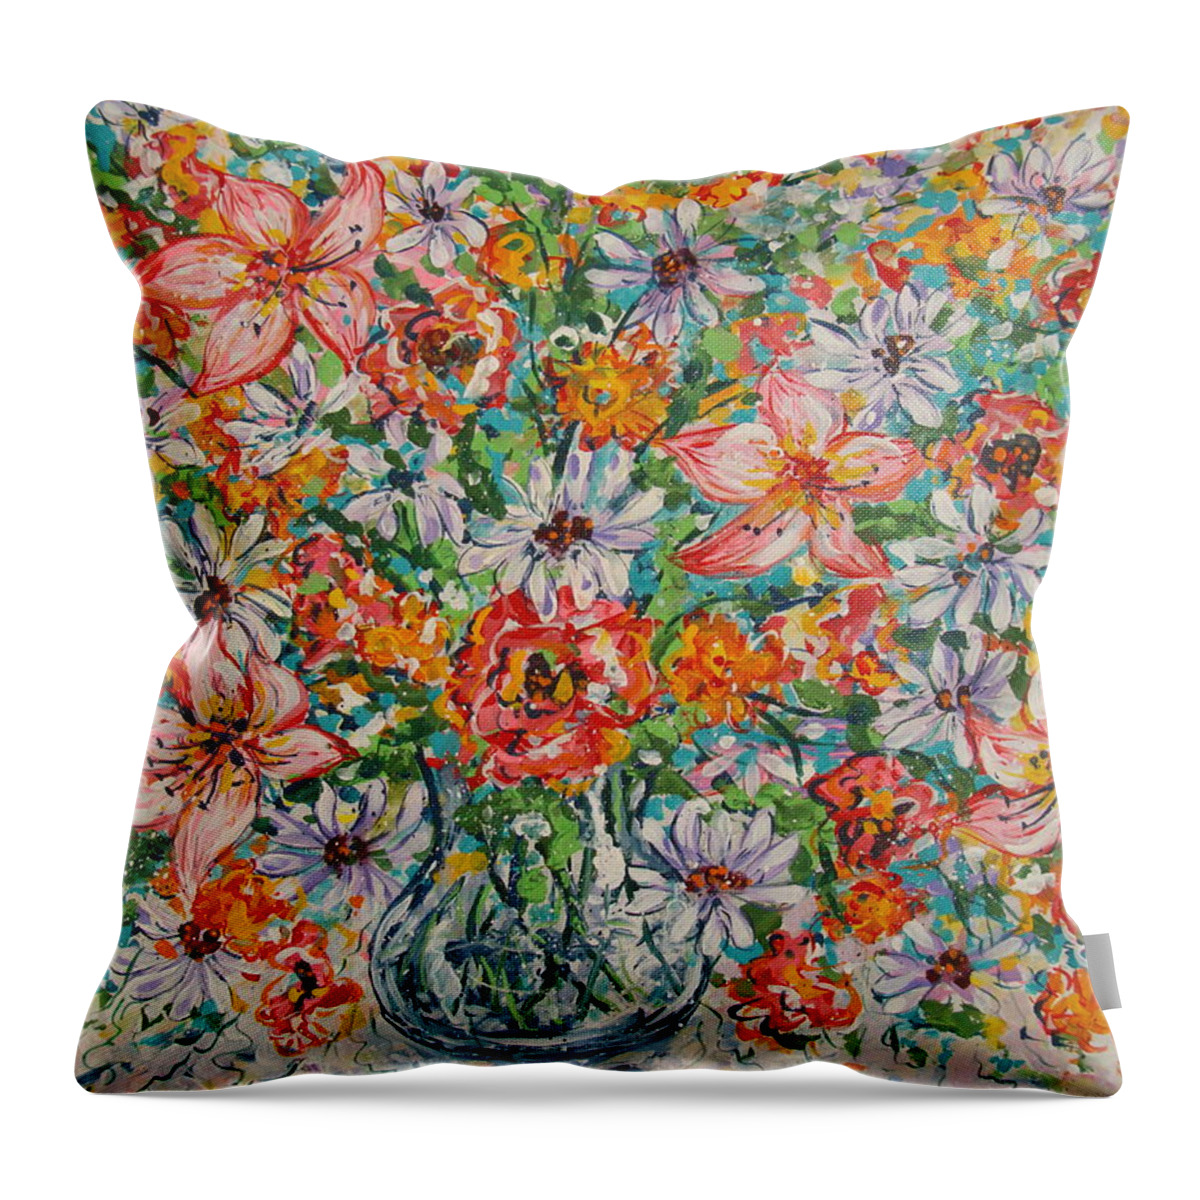 Flowers Throw Pillow featuring the painting Burst Of Flowers by Leonard Holland